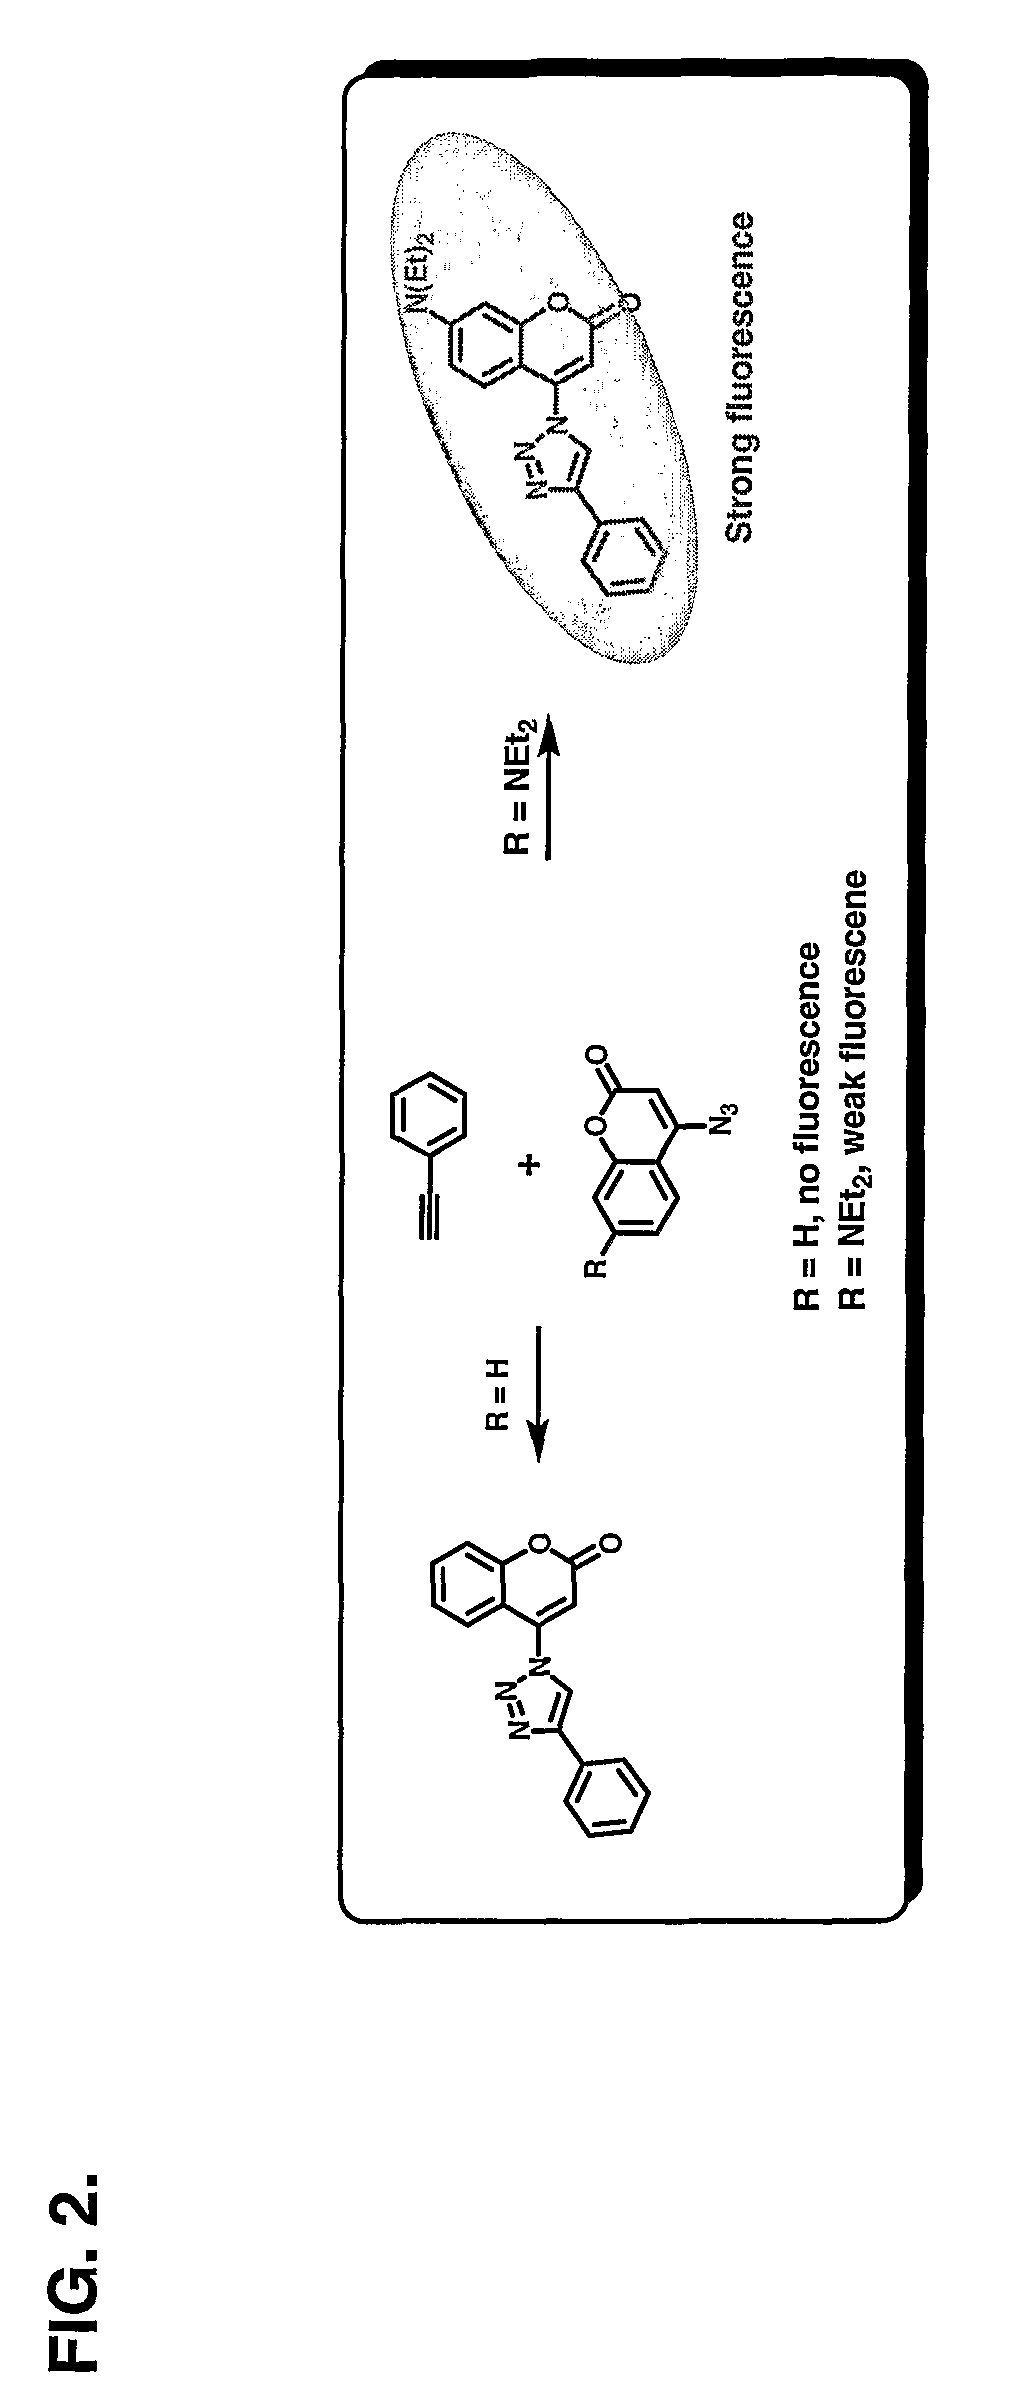 Chemoselective fluorgenic molecular linkers and methods for their preparation and use